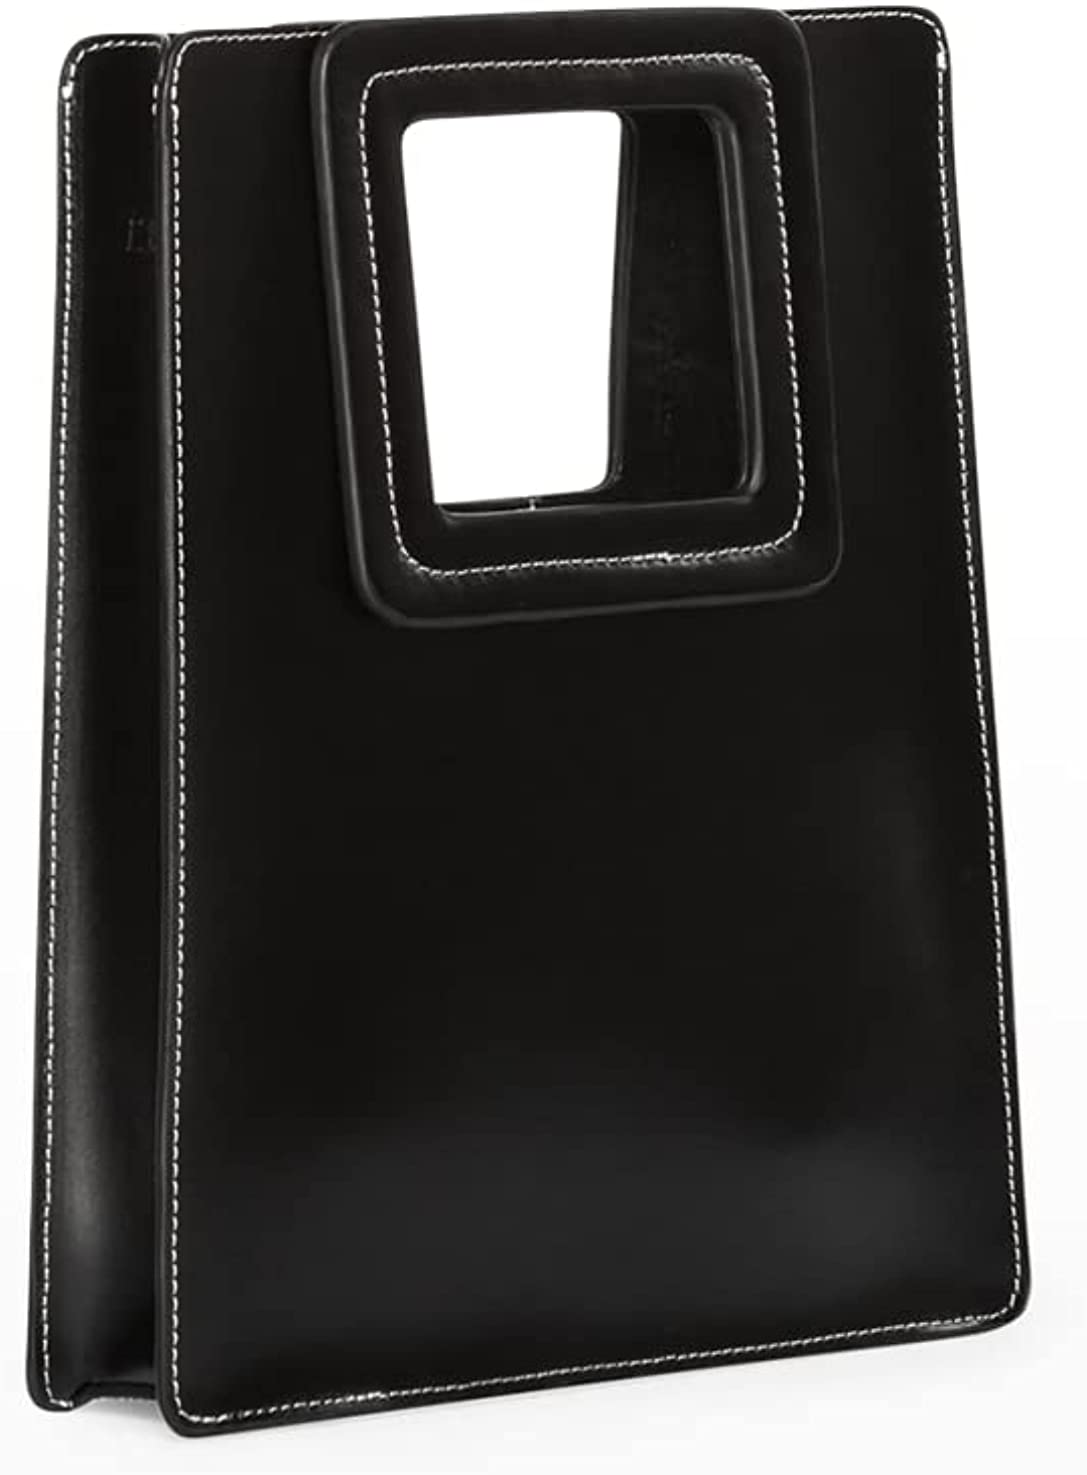 Staud Women's Shirley Tall Leather Cut-Out Top Handle Tote Shoulder Bag Black OS